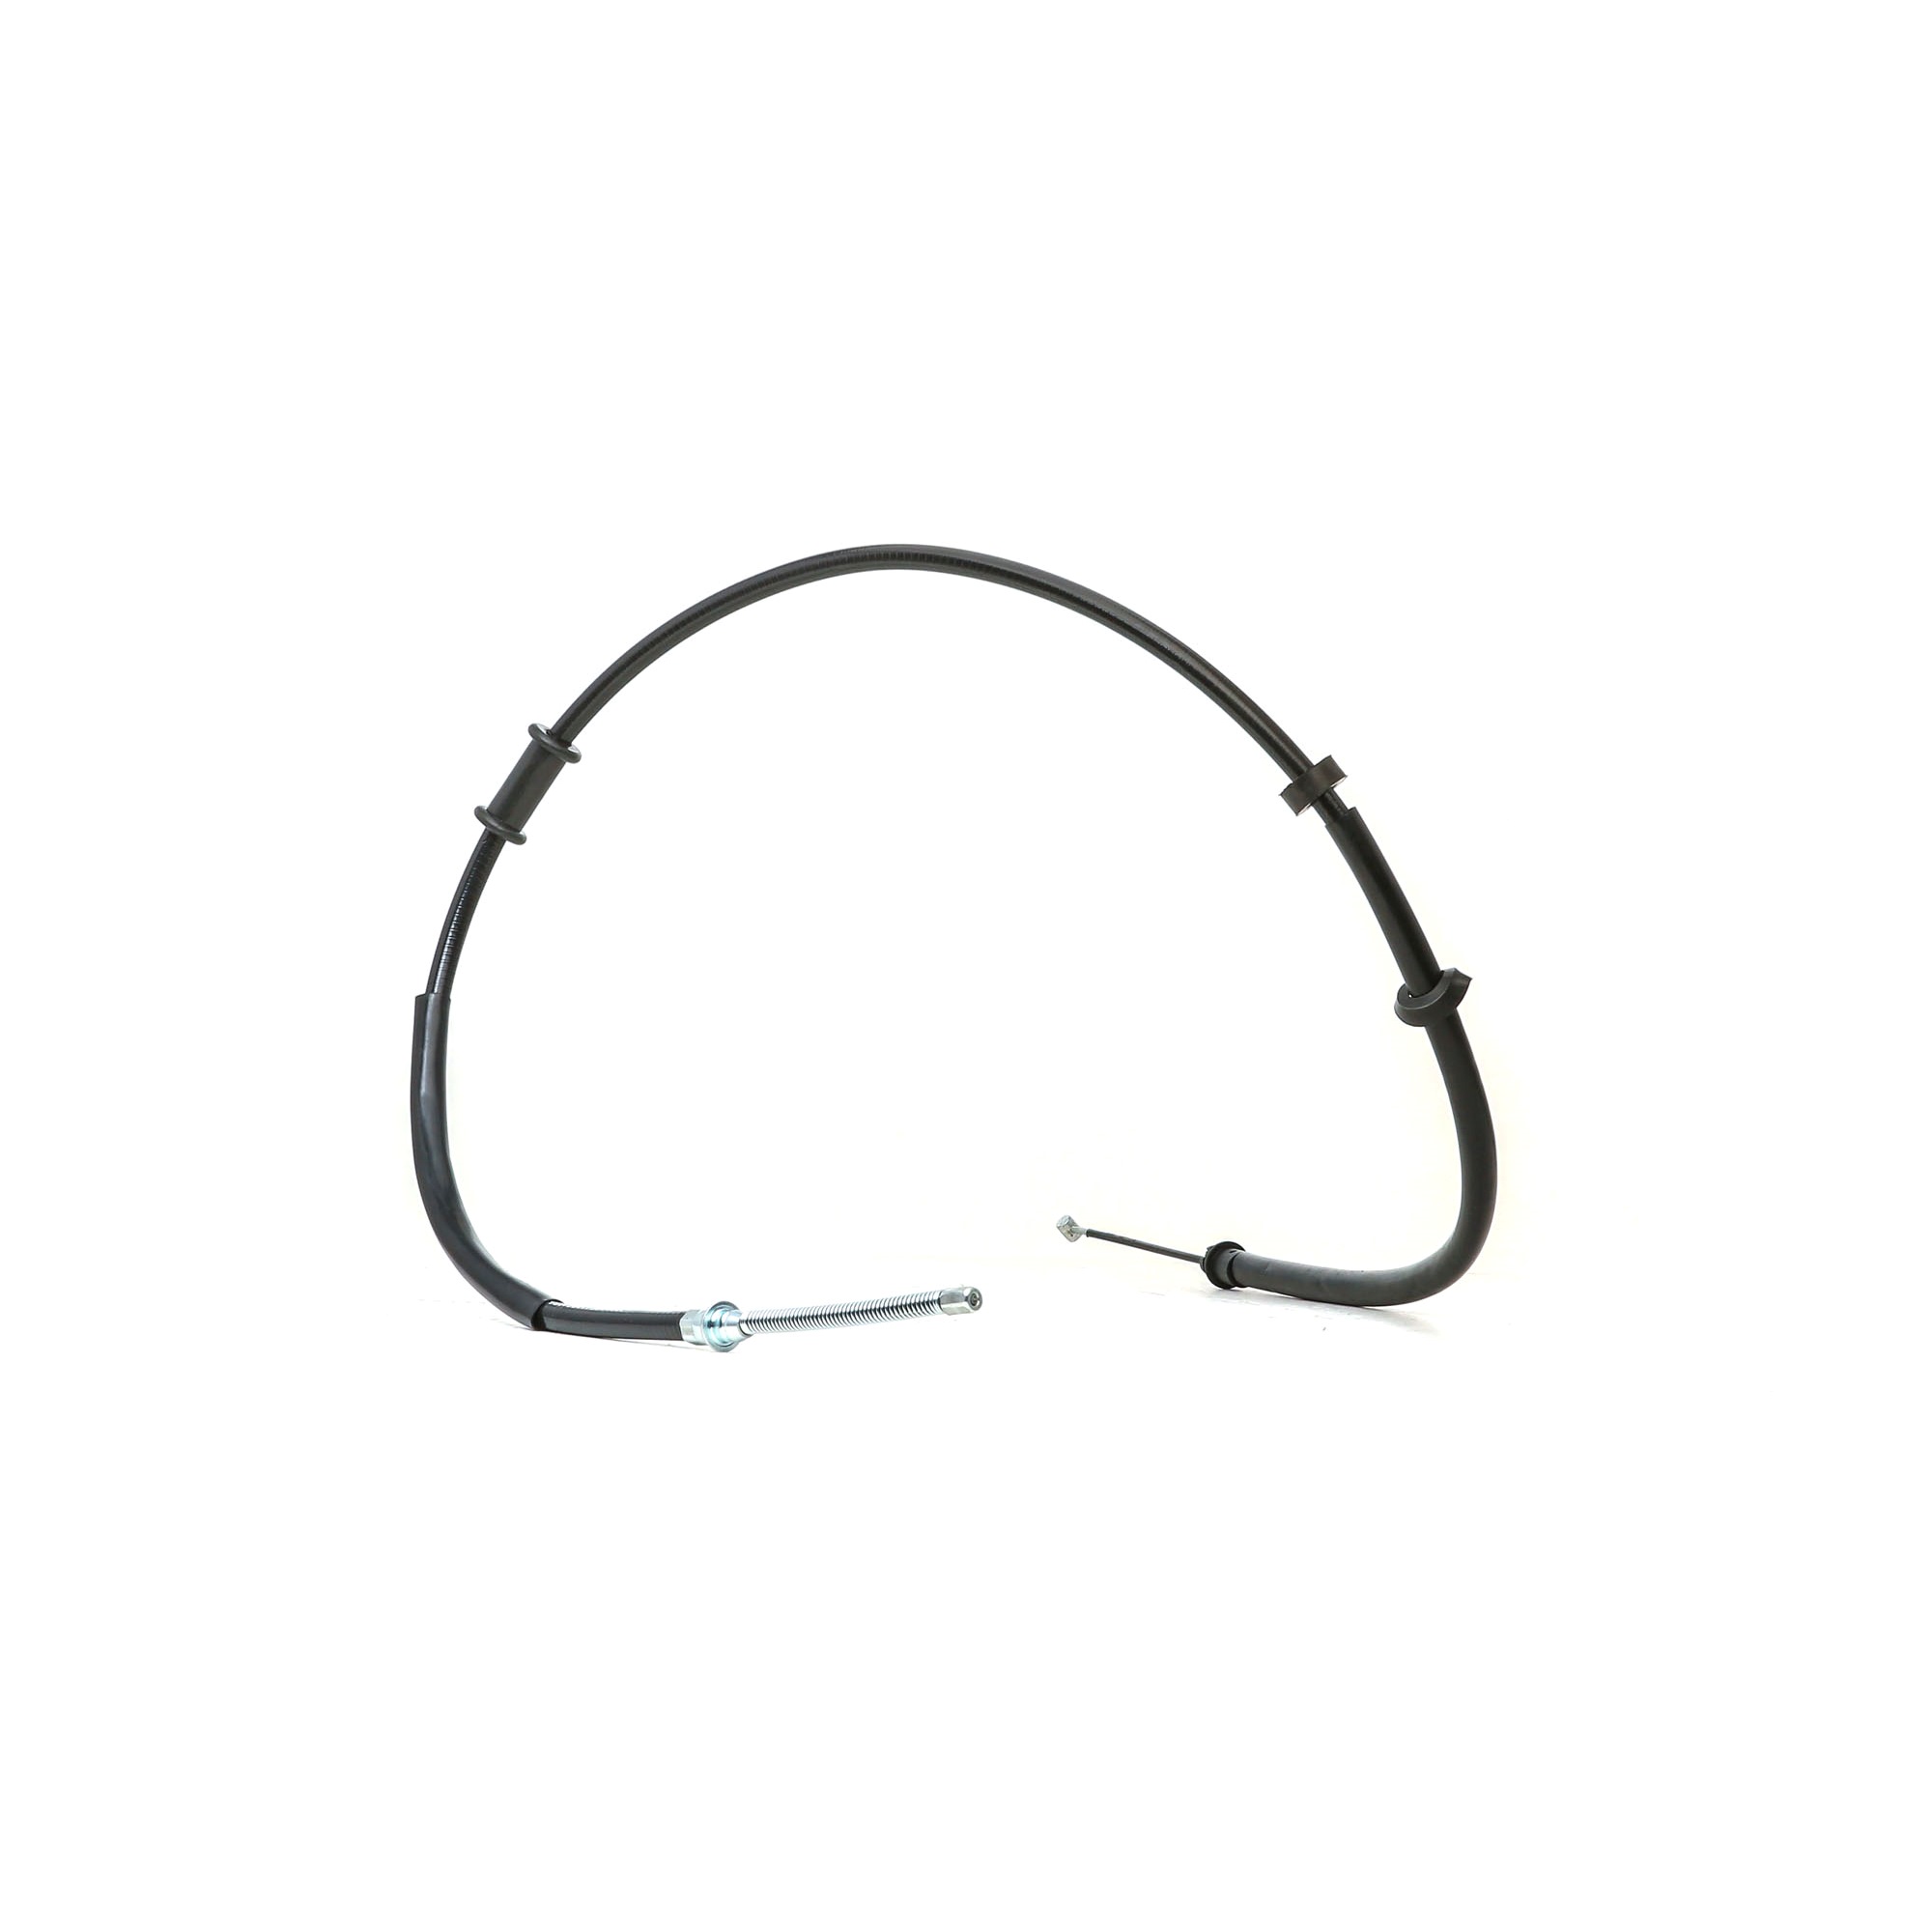 RIDEX 124C0224 Hand brake cable Rear, Right, 1435/1178mm, Disc/Drum, for parking brake